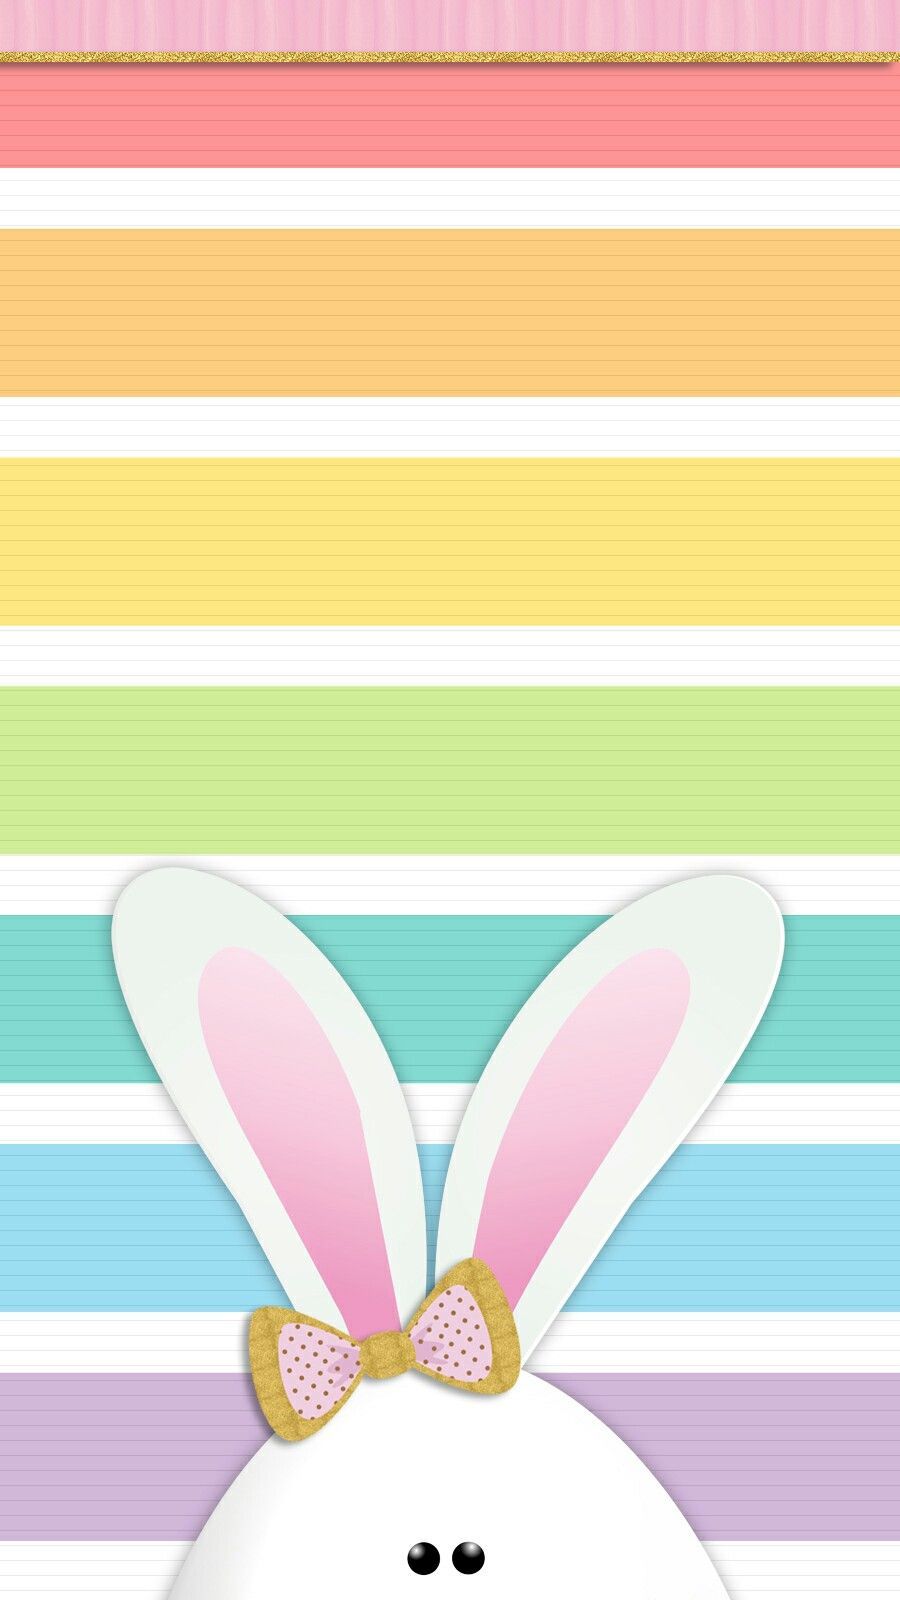 Easter bunny with a bow tie on a striped background - Easter